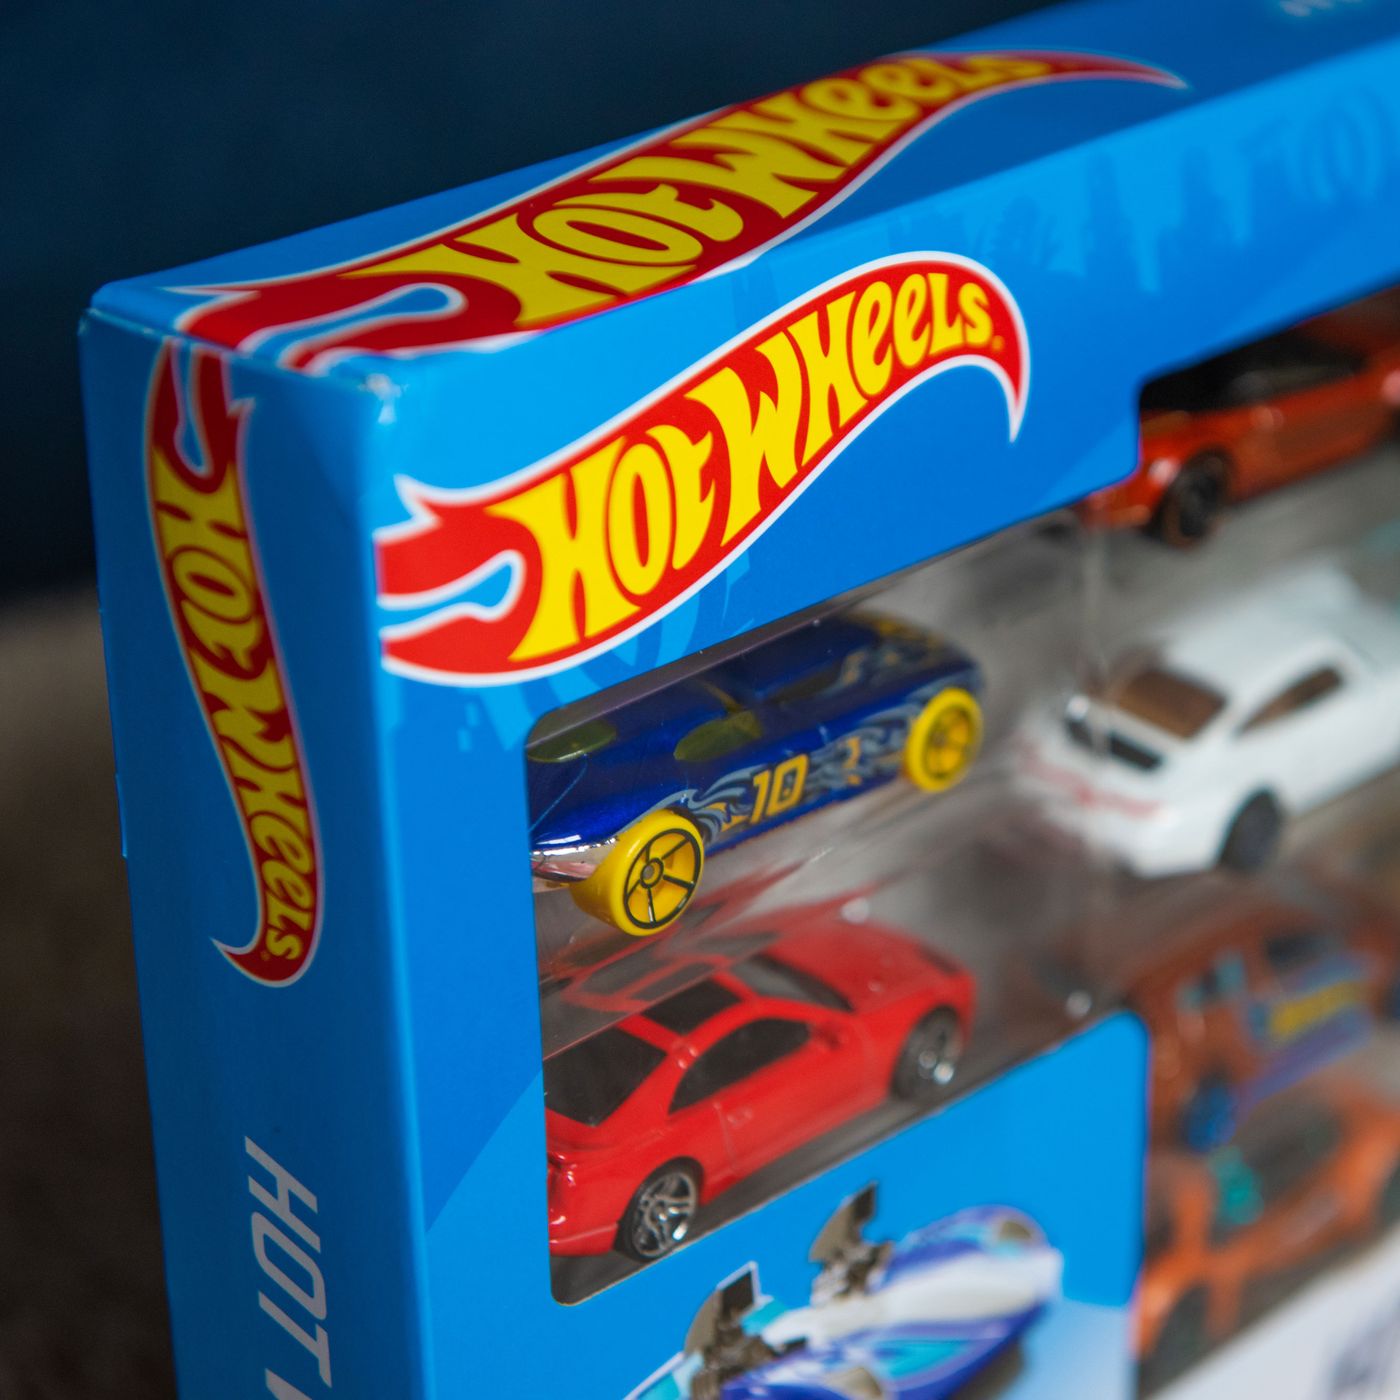 My girlfriend is really into collecting Hot Wheels (and has by